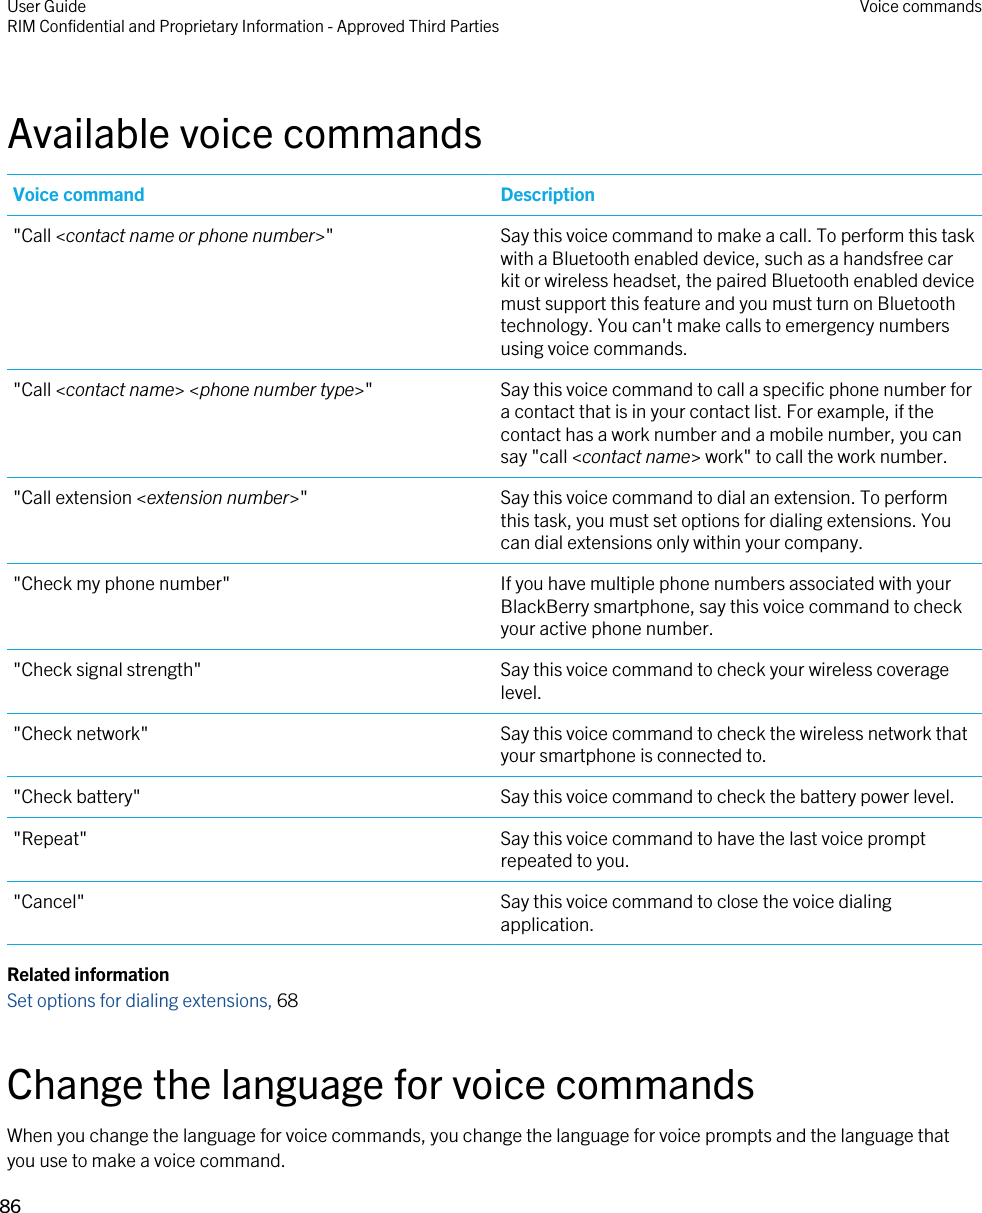 Available voice commandsVoice command Description&quot;Call &lt;contact name or phone number&gt;&quot; Say this voice command to make a call. To perform this task with a Bluetooth enabled device, such as a handsfree car kit or wireless headset, the paired Bluetooth enabled device must support this feature and you must turn on Bluetooth technology. You can&apos;t make calls to emergency numbers using voice commands.&quot;Call &lt;contact name&gt; &lt;phone number type&gt;&quot; Say this voice command to call a specific phone number for a contact that is in your contact list. For example, if the contact has a work number and a mobile number, you can say &quot;call &lt;contact name&gt; work&quot; to call the work number.&quot;Call extension &lt;extension number&gt;&quot; Say this voice command to dial an extension. To perform this task, you must set options for dialing extensions. You can dial extensions only within your company.&quot;Check my phone number&quot; If you have multiple phone numbers associated with your BlackBerry smartphone, say this voice command to check your active phone number.&quot;Check signal strength&quot; Say this voice command to check your wireless coverage level.&quot;Check network&quot; Say this voice command to check the wireless network that your smartphone is connected to.&quot;Check battery&quot; Say this voice command to check the battery power level.&quot;Repeat&quot; Say this voice command to have the last voice prompt repeated to you.&quot;Cancel&quot; Say this voice command to close the voice dialing application.Related informationSet options for dialing extensions, 68 Change the language for voice commandsWhen you change the language for voice commands, you change the language for voice prompts and the language that you use to make a voice command.User GuideRIM Confidential and Proprietary Information - Approved Third Parties Voice commands86 